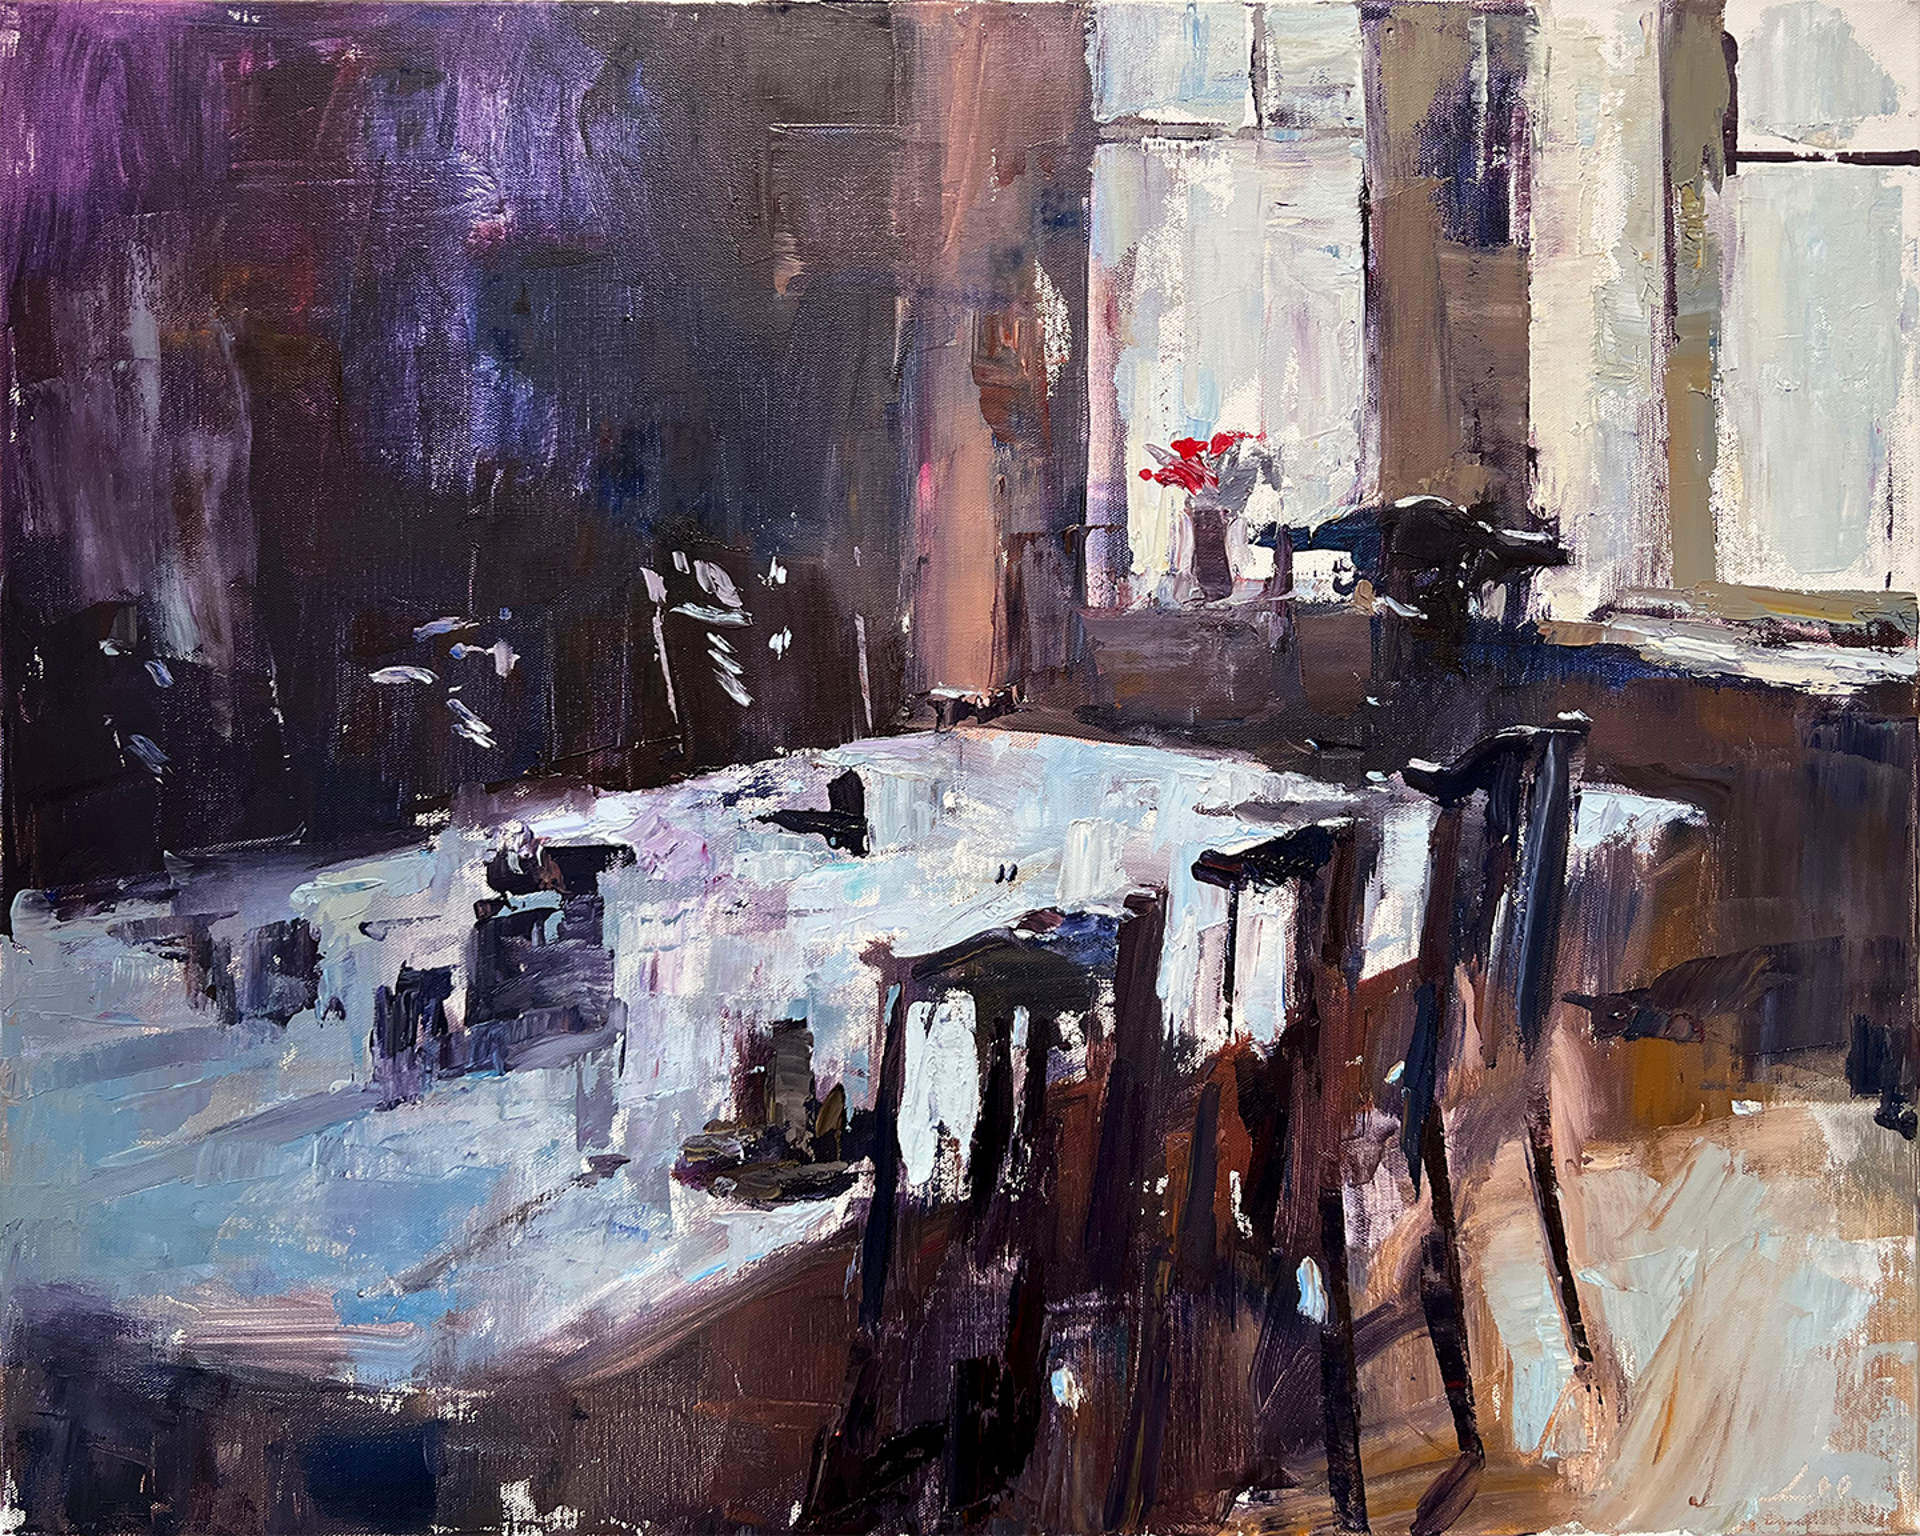 Morning Table by Patrick Lee